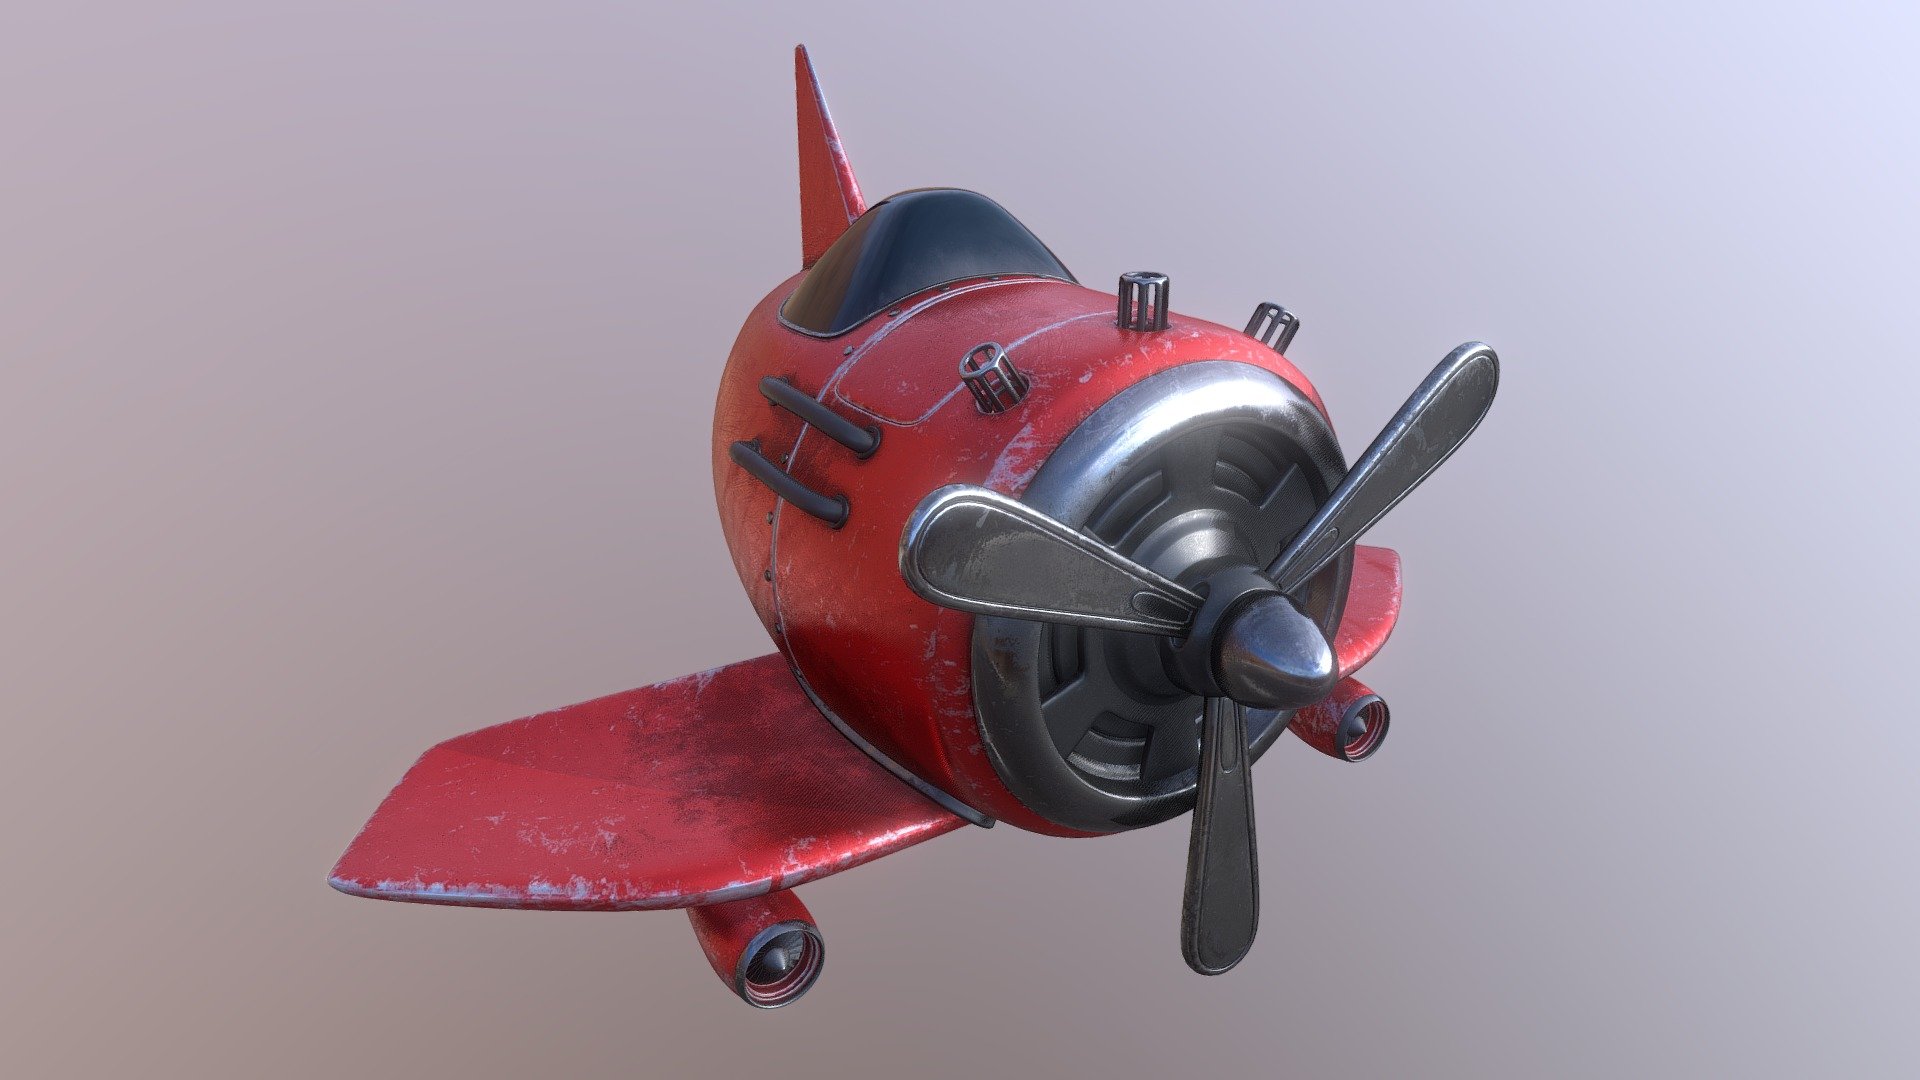 Hello! This a high-poly cartoon styled aircraft modelling and texturing practise. 
Modelling is made in Blender 2.81 and textured in Adobe's Substance Painter.

I really enjoyed making this model. I hope you like it as well!

You can see more details in my Behance Portfolio!
Behance: https://www.behance.net/fatihsahinn

Don't forget to check my instagram account for more of my works!
Instagram: https://www.instagram.com/fatihsahindesign/ - Cartoon Style Aircraft - 3D model by Fatih174 3d model